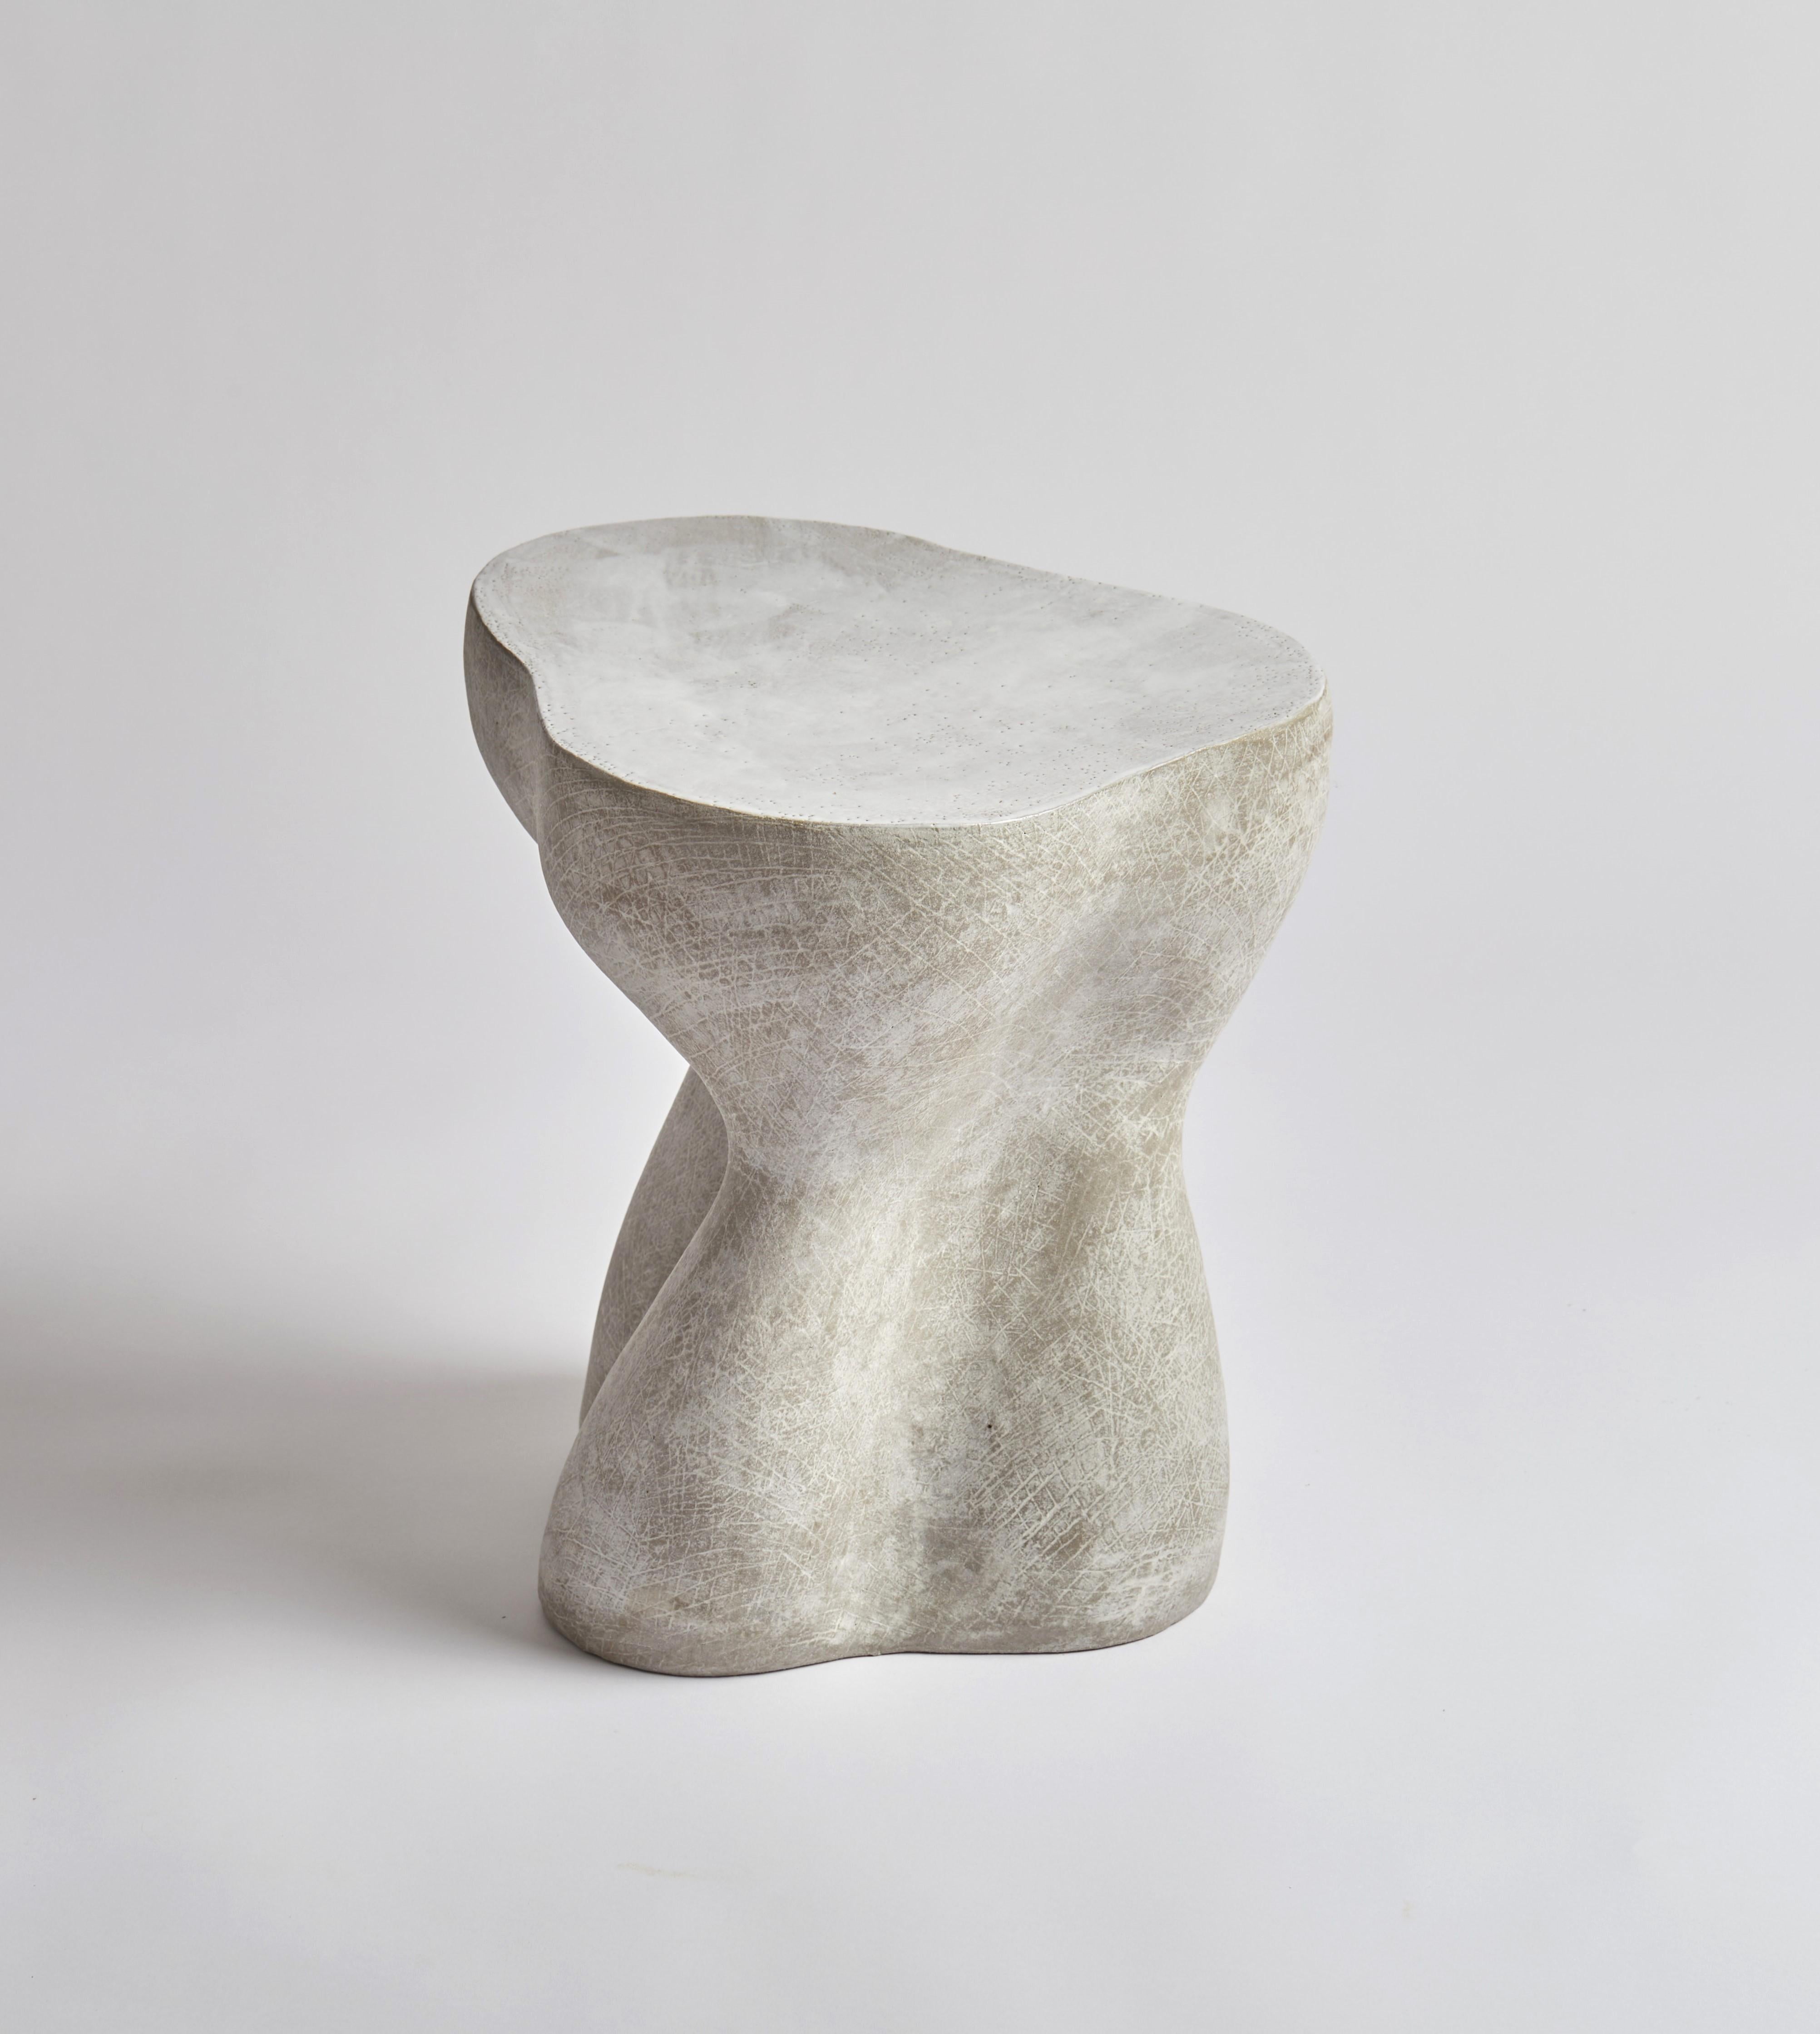 Each piece is made by hand making for originality and true craftsmanship.  Kerry Hastings takes inspiration from landscape, the body and the sensual curves found in the work of sculptors such as Jean Hans Arp and Barbara Hepworth.  Kerry uses the